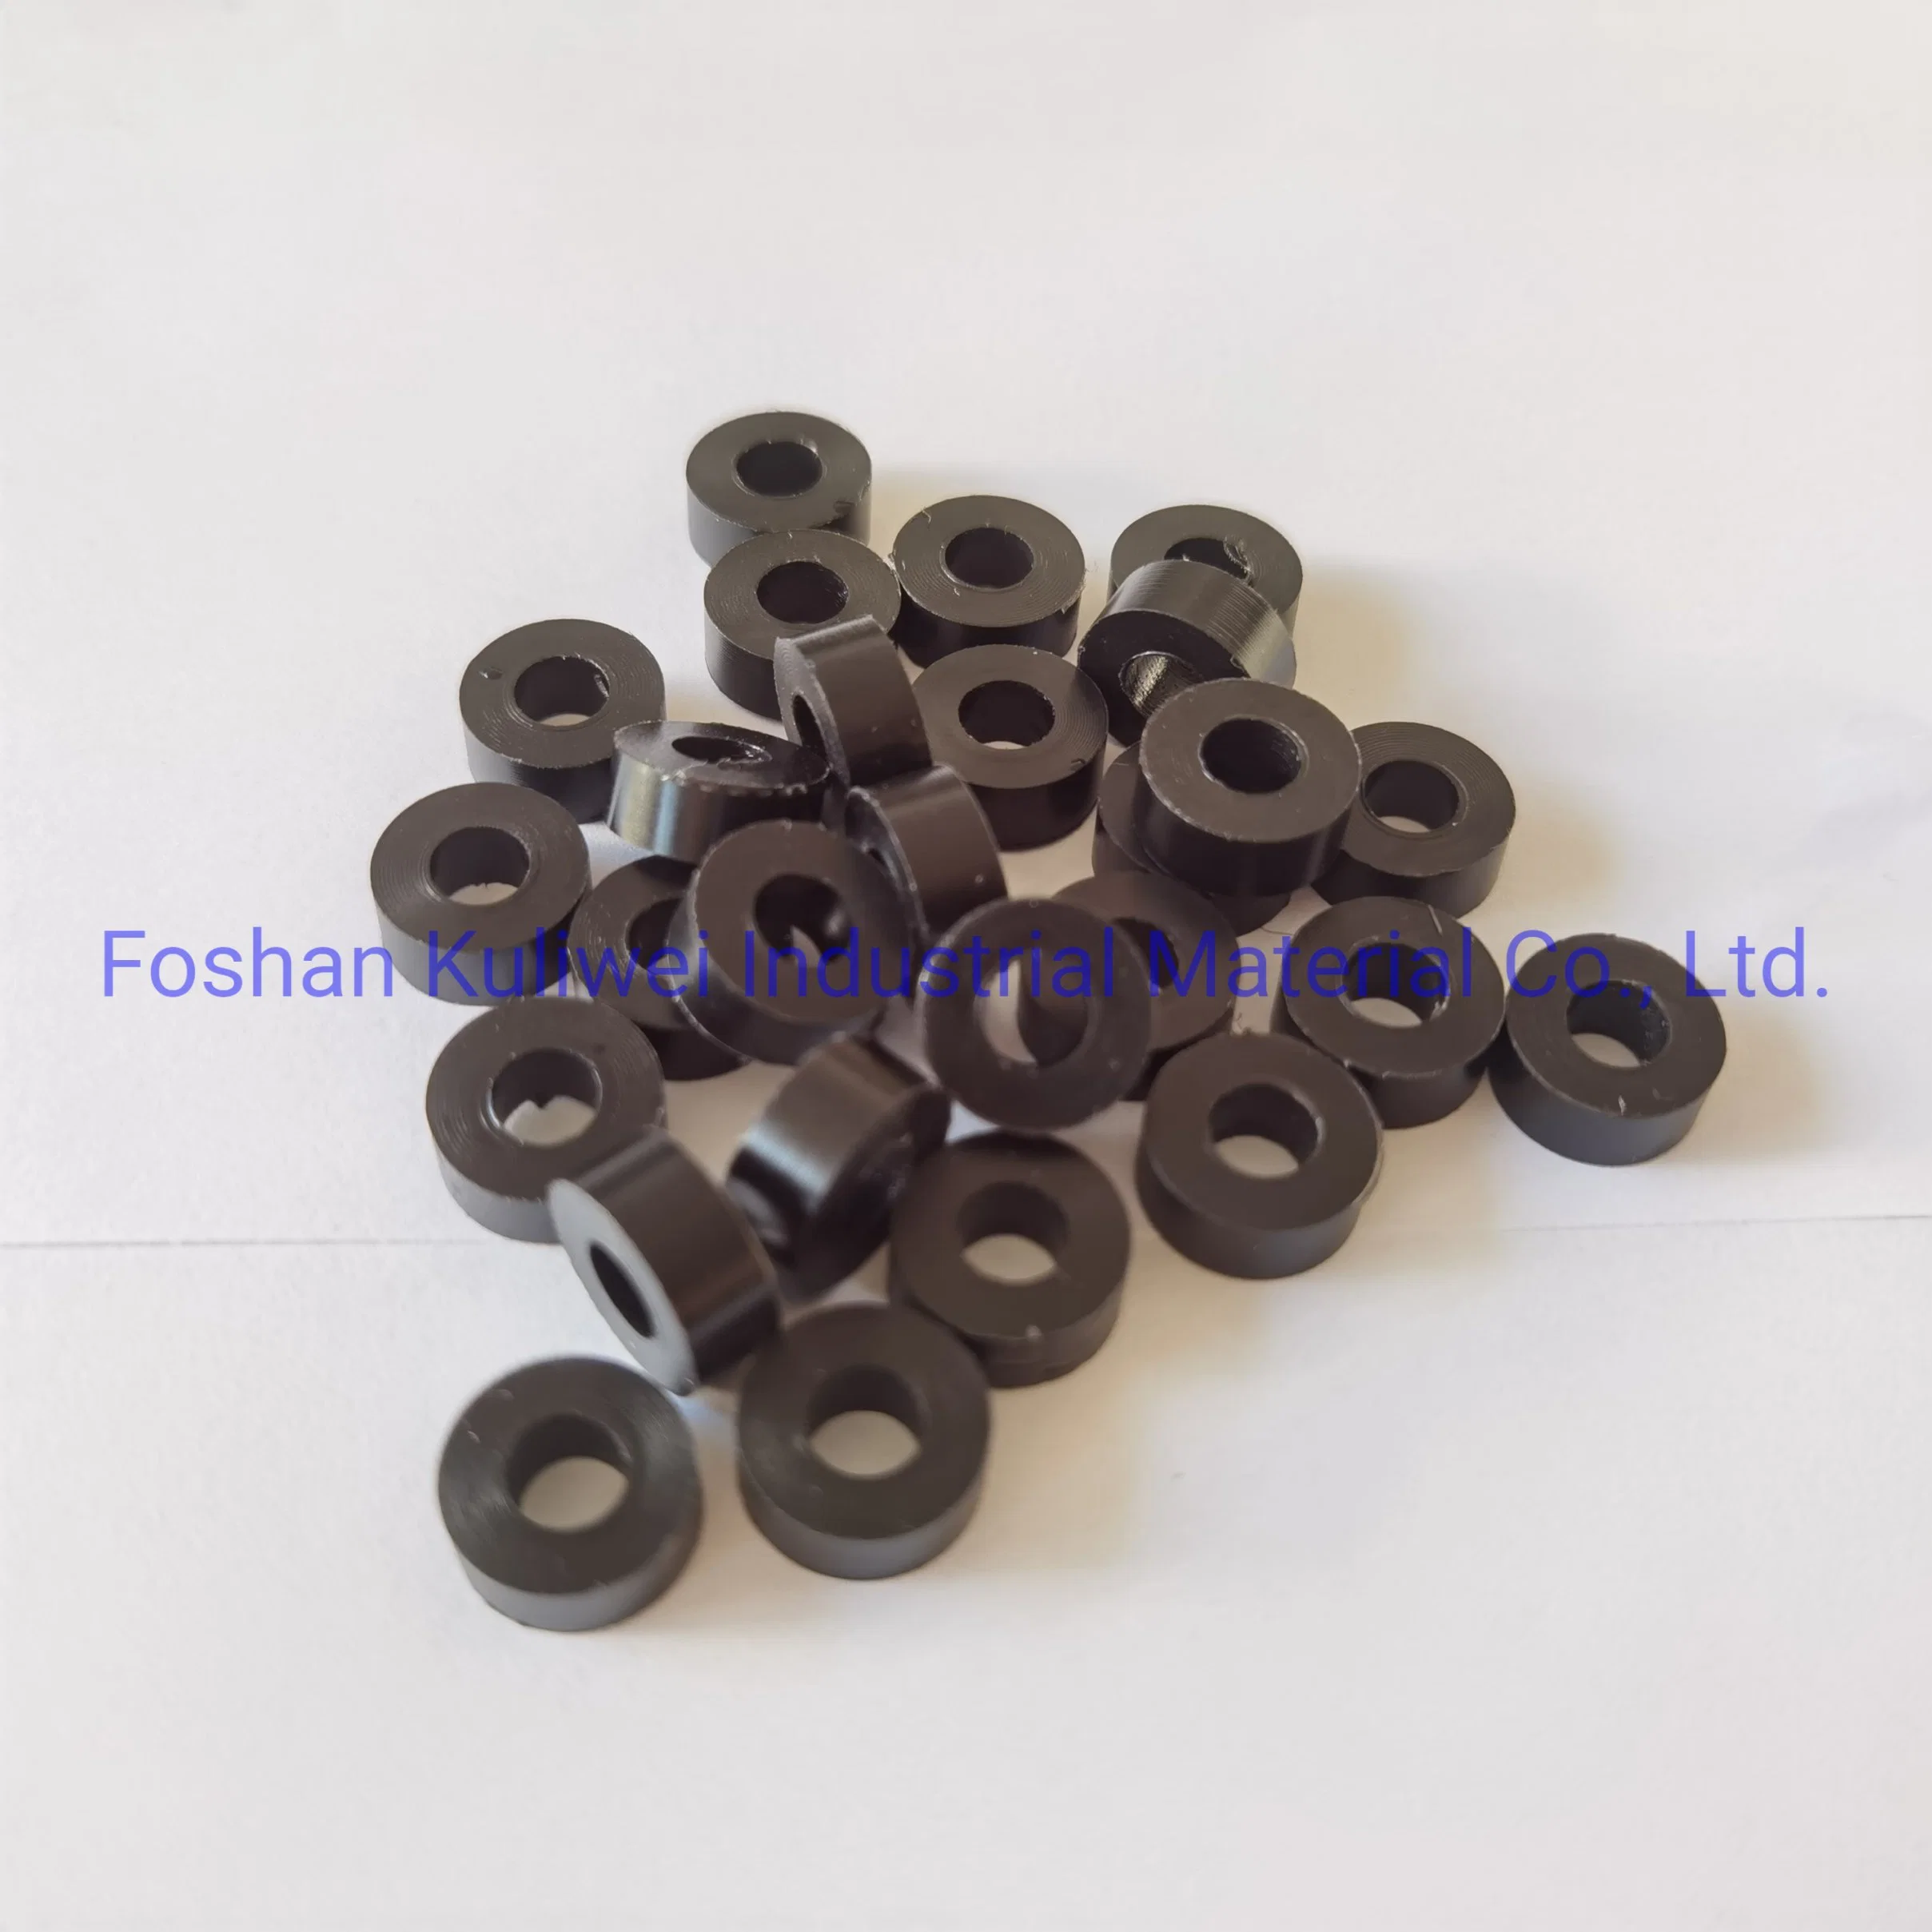 NBR FKM EPDM Silicone Neoperene HNBR Round Square Oval Flat Sealing Ring Flange Gasket Part Rubber Seal Washer